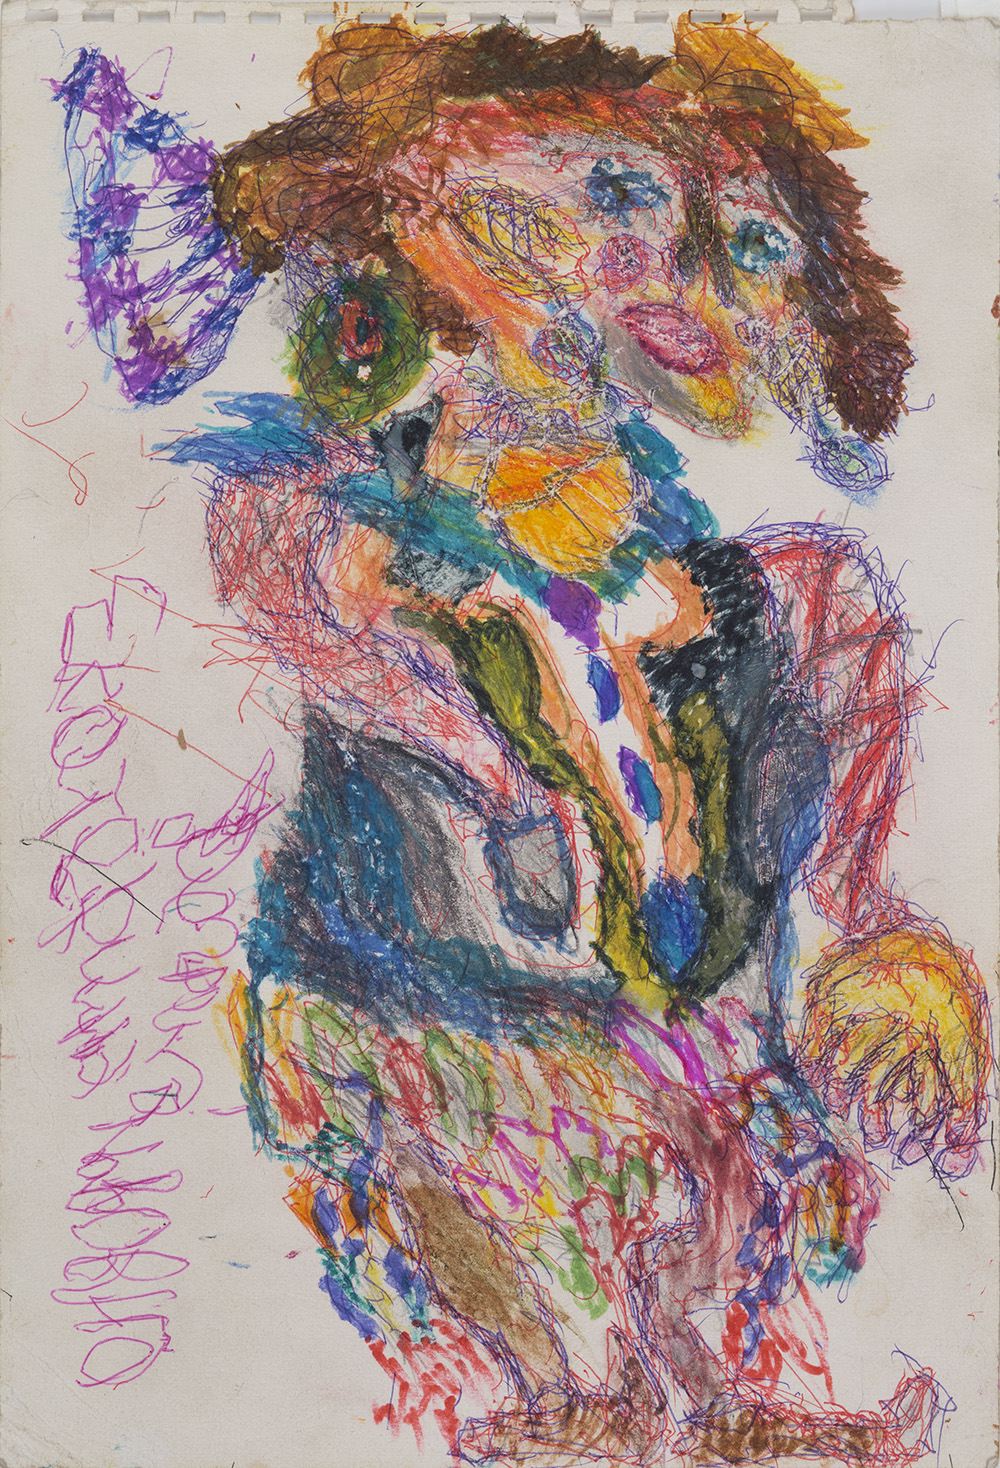   Ilya Natarevich    Untitled  , 2015 Ink, graphite, crayon on paper 15 x 10.25 inches 38.1 x 26 cm INa 10 